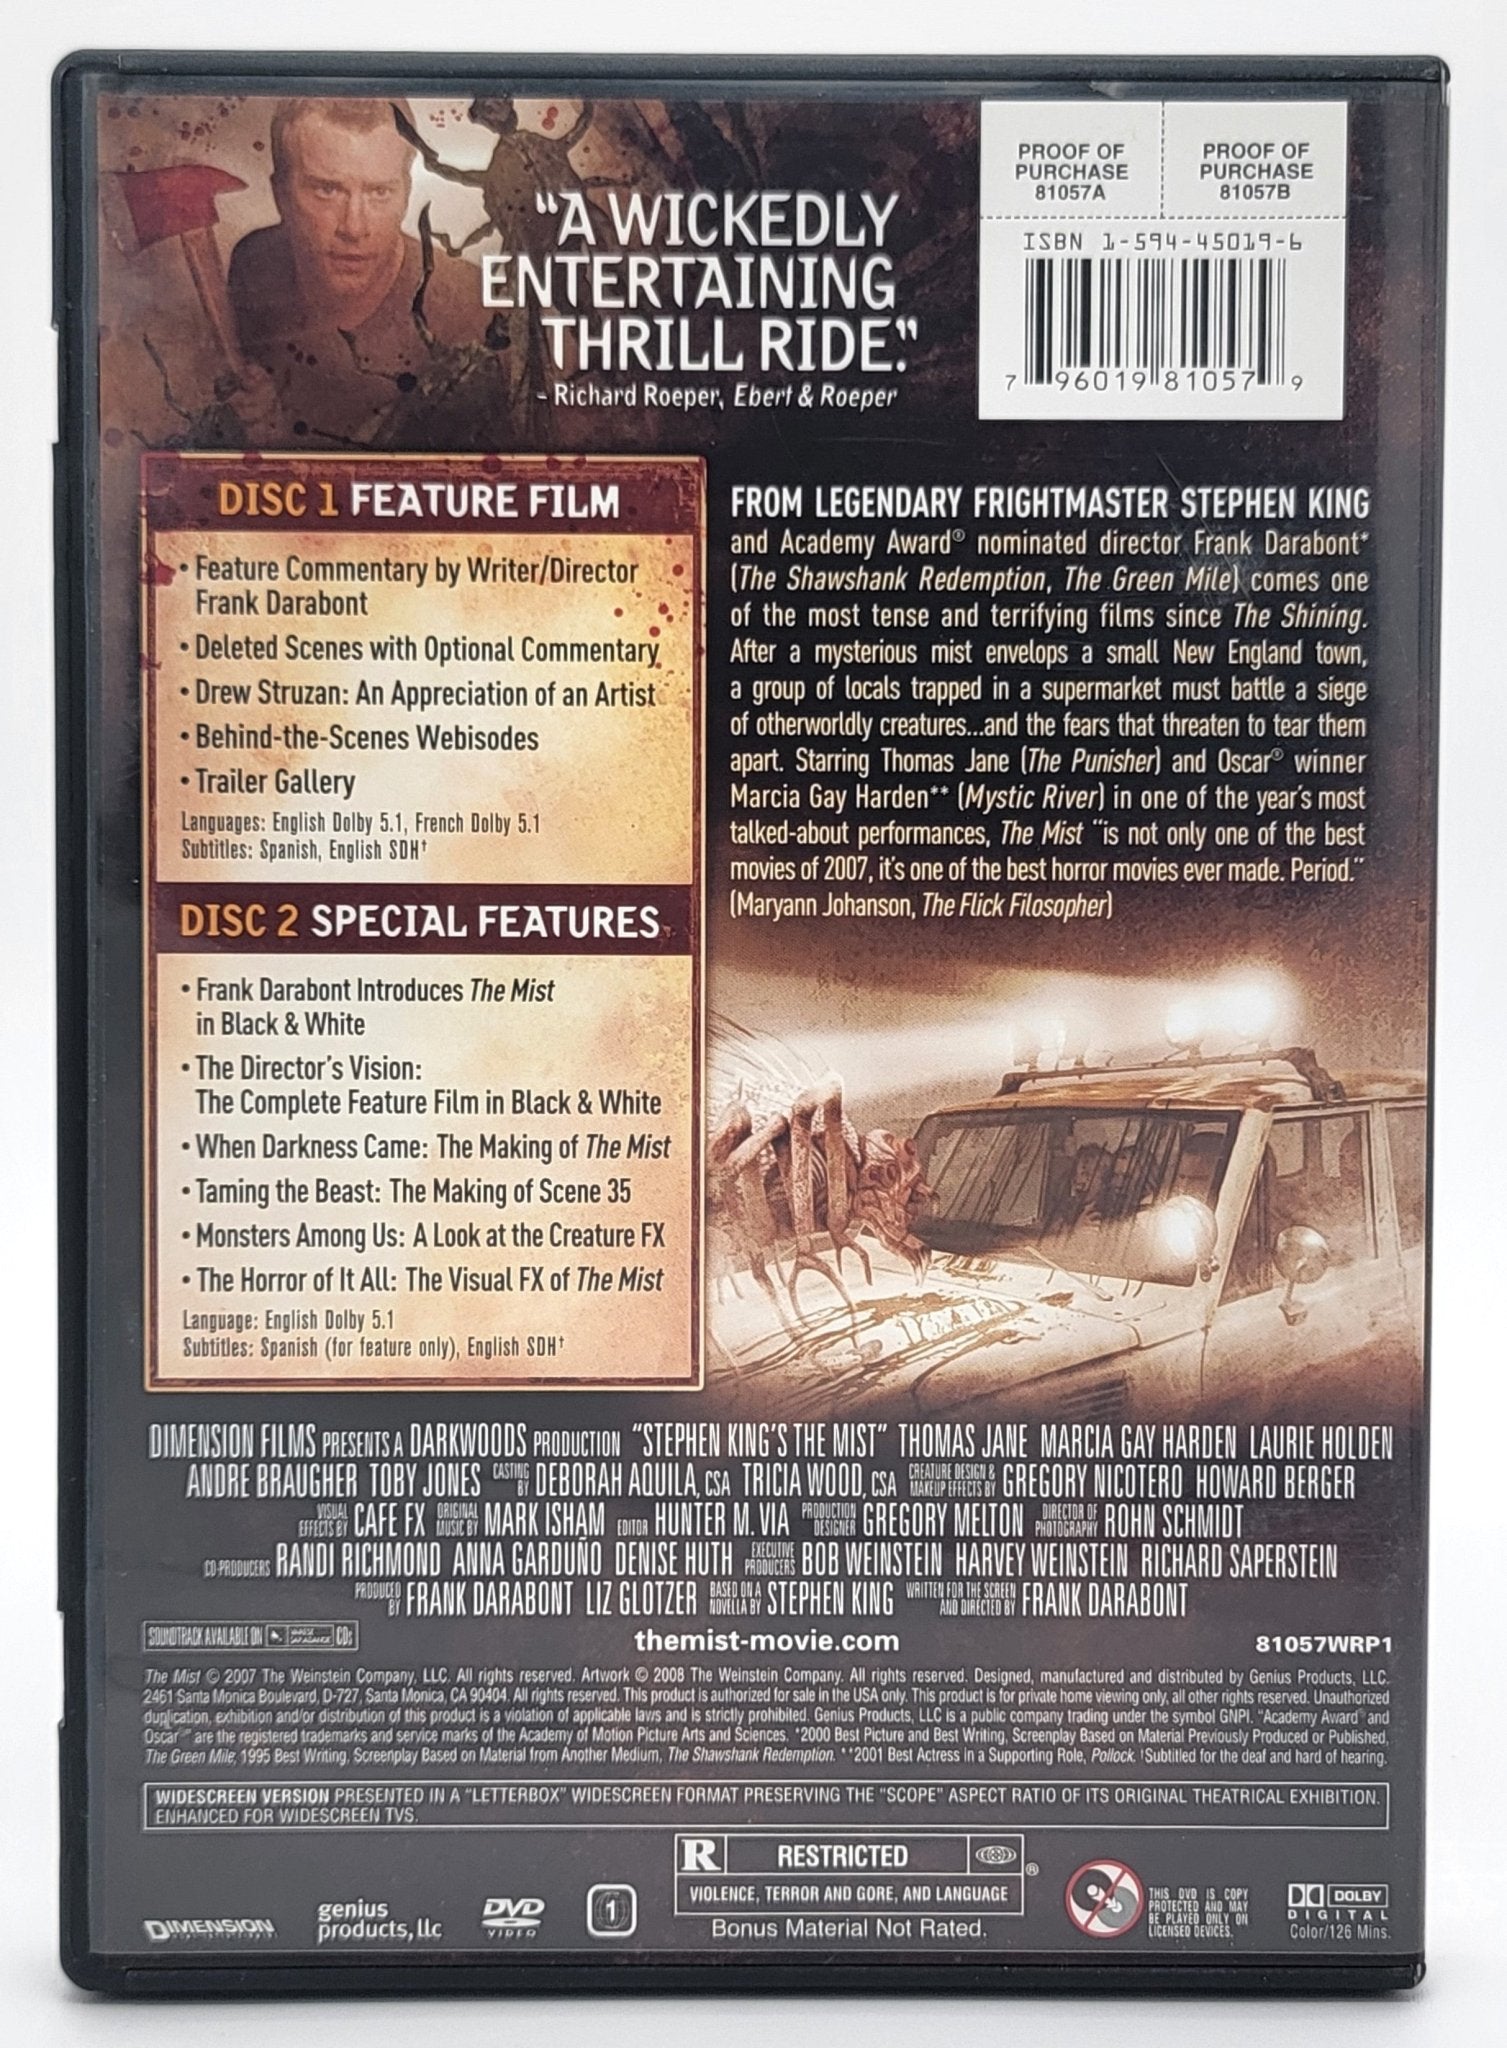 Lionsgate Home Entertainment - The Mist | DVD | 2 Disc Collection Edition - Widescreen - DVD - Steady Bunny Shop